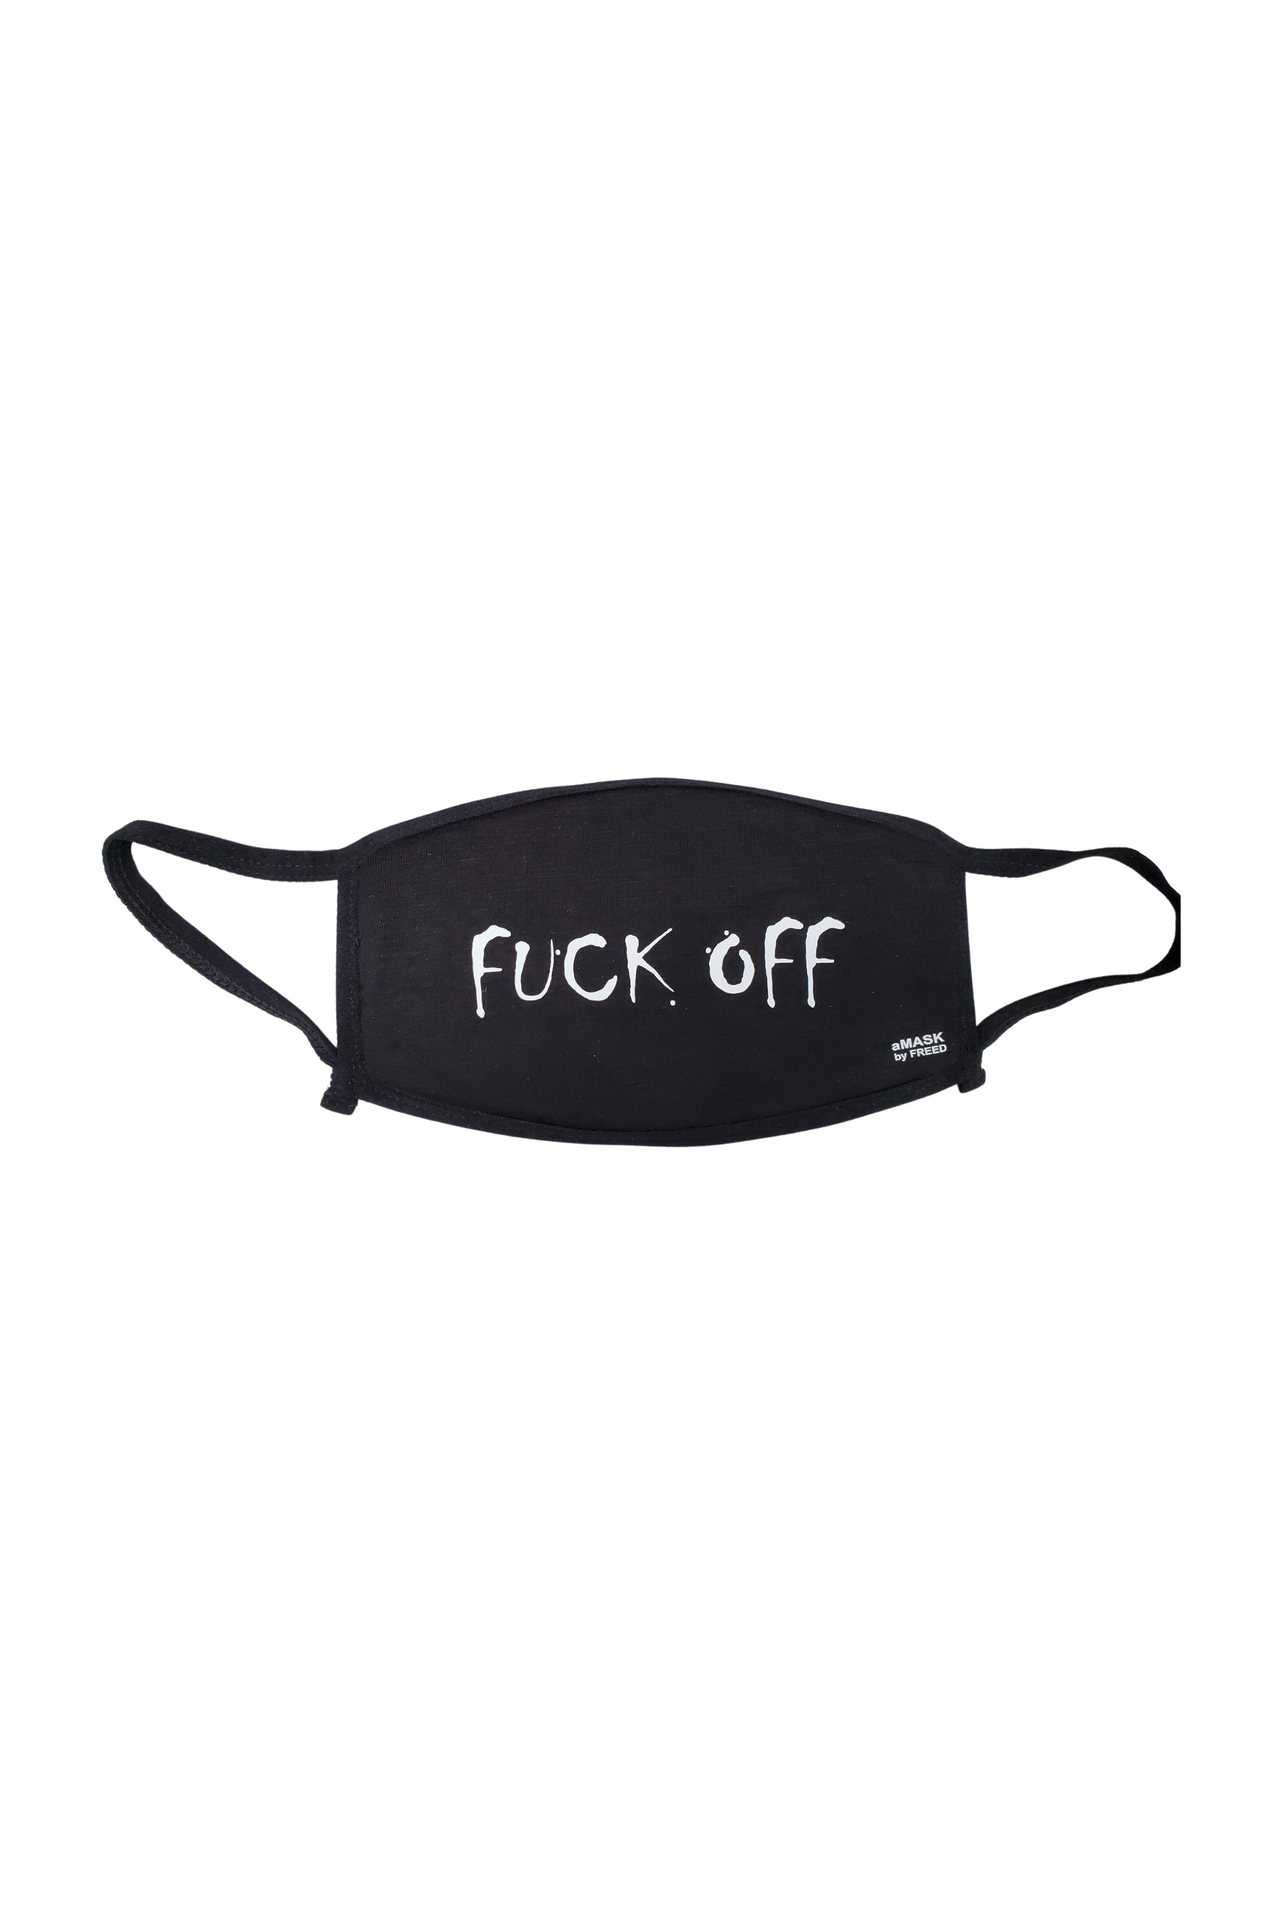 F*CK OFF - ADULT FACE MASK